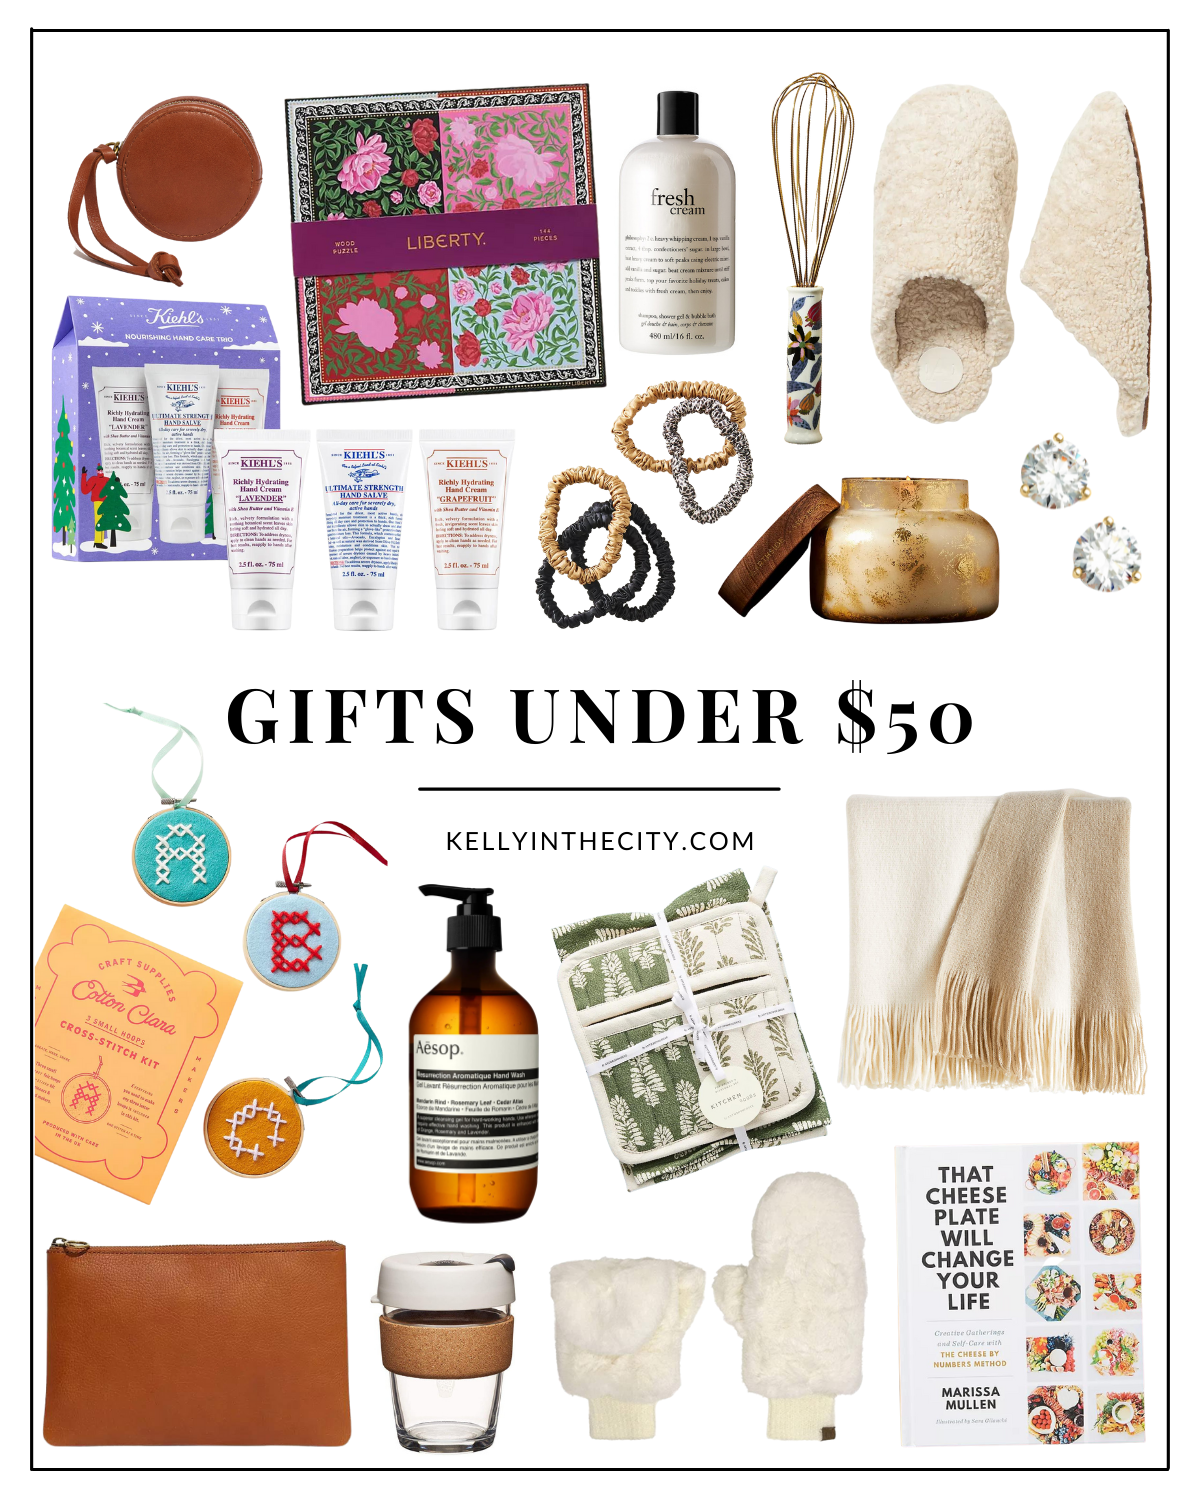 Gifts Under $50 - Kelly in the City